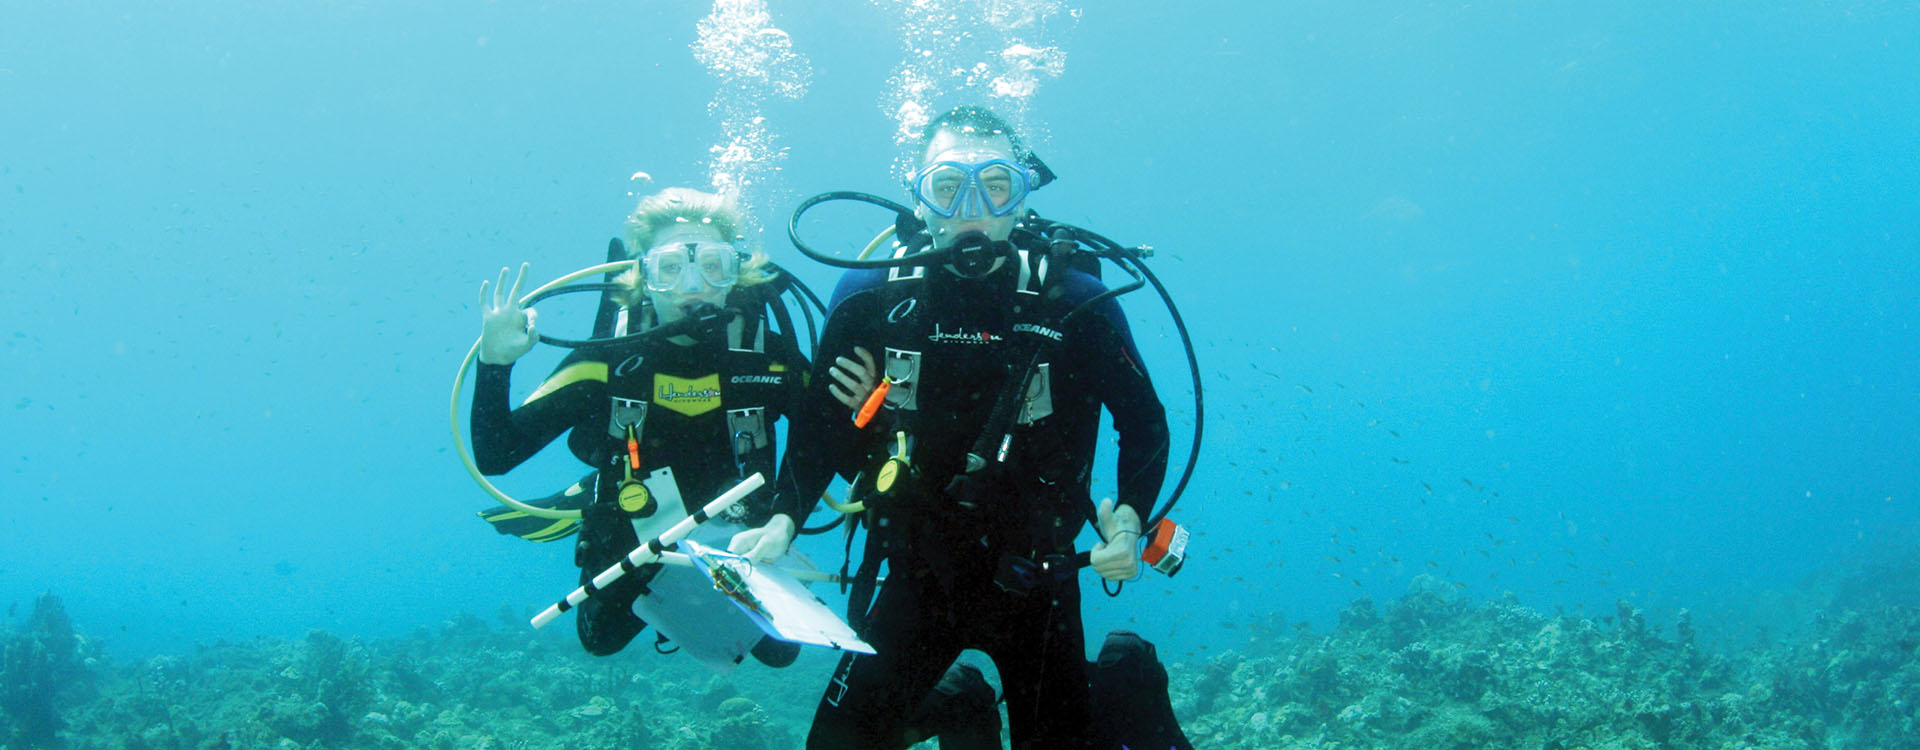 WLC students scuba diving near coral reef